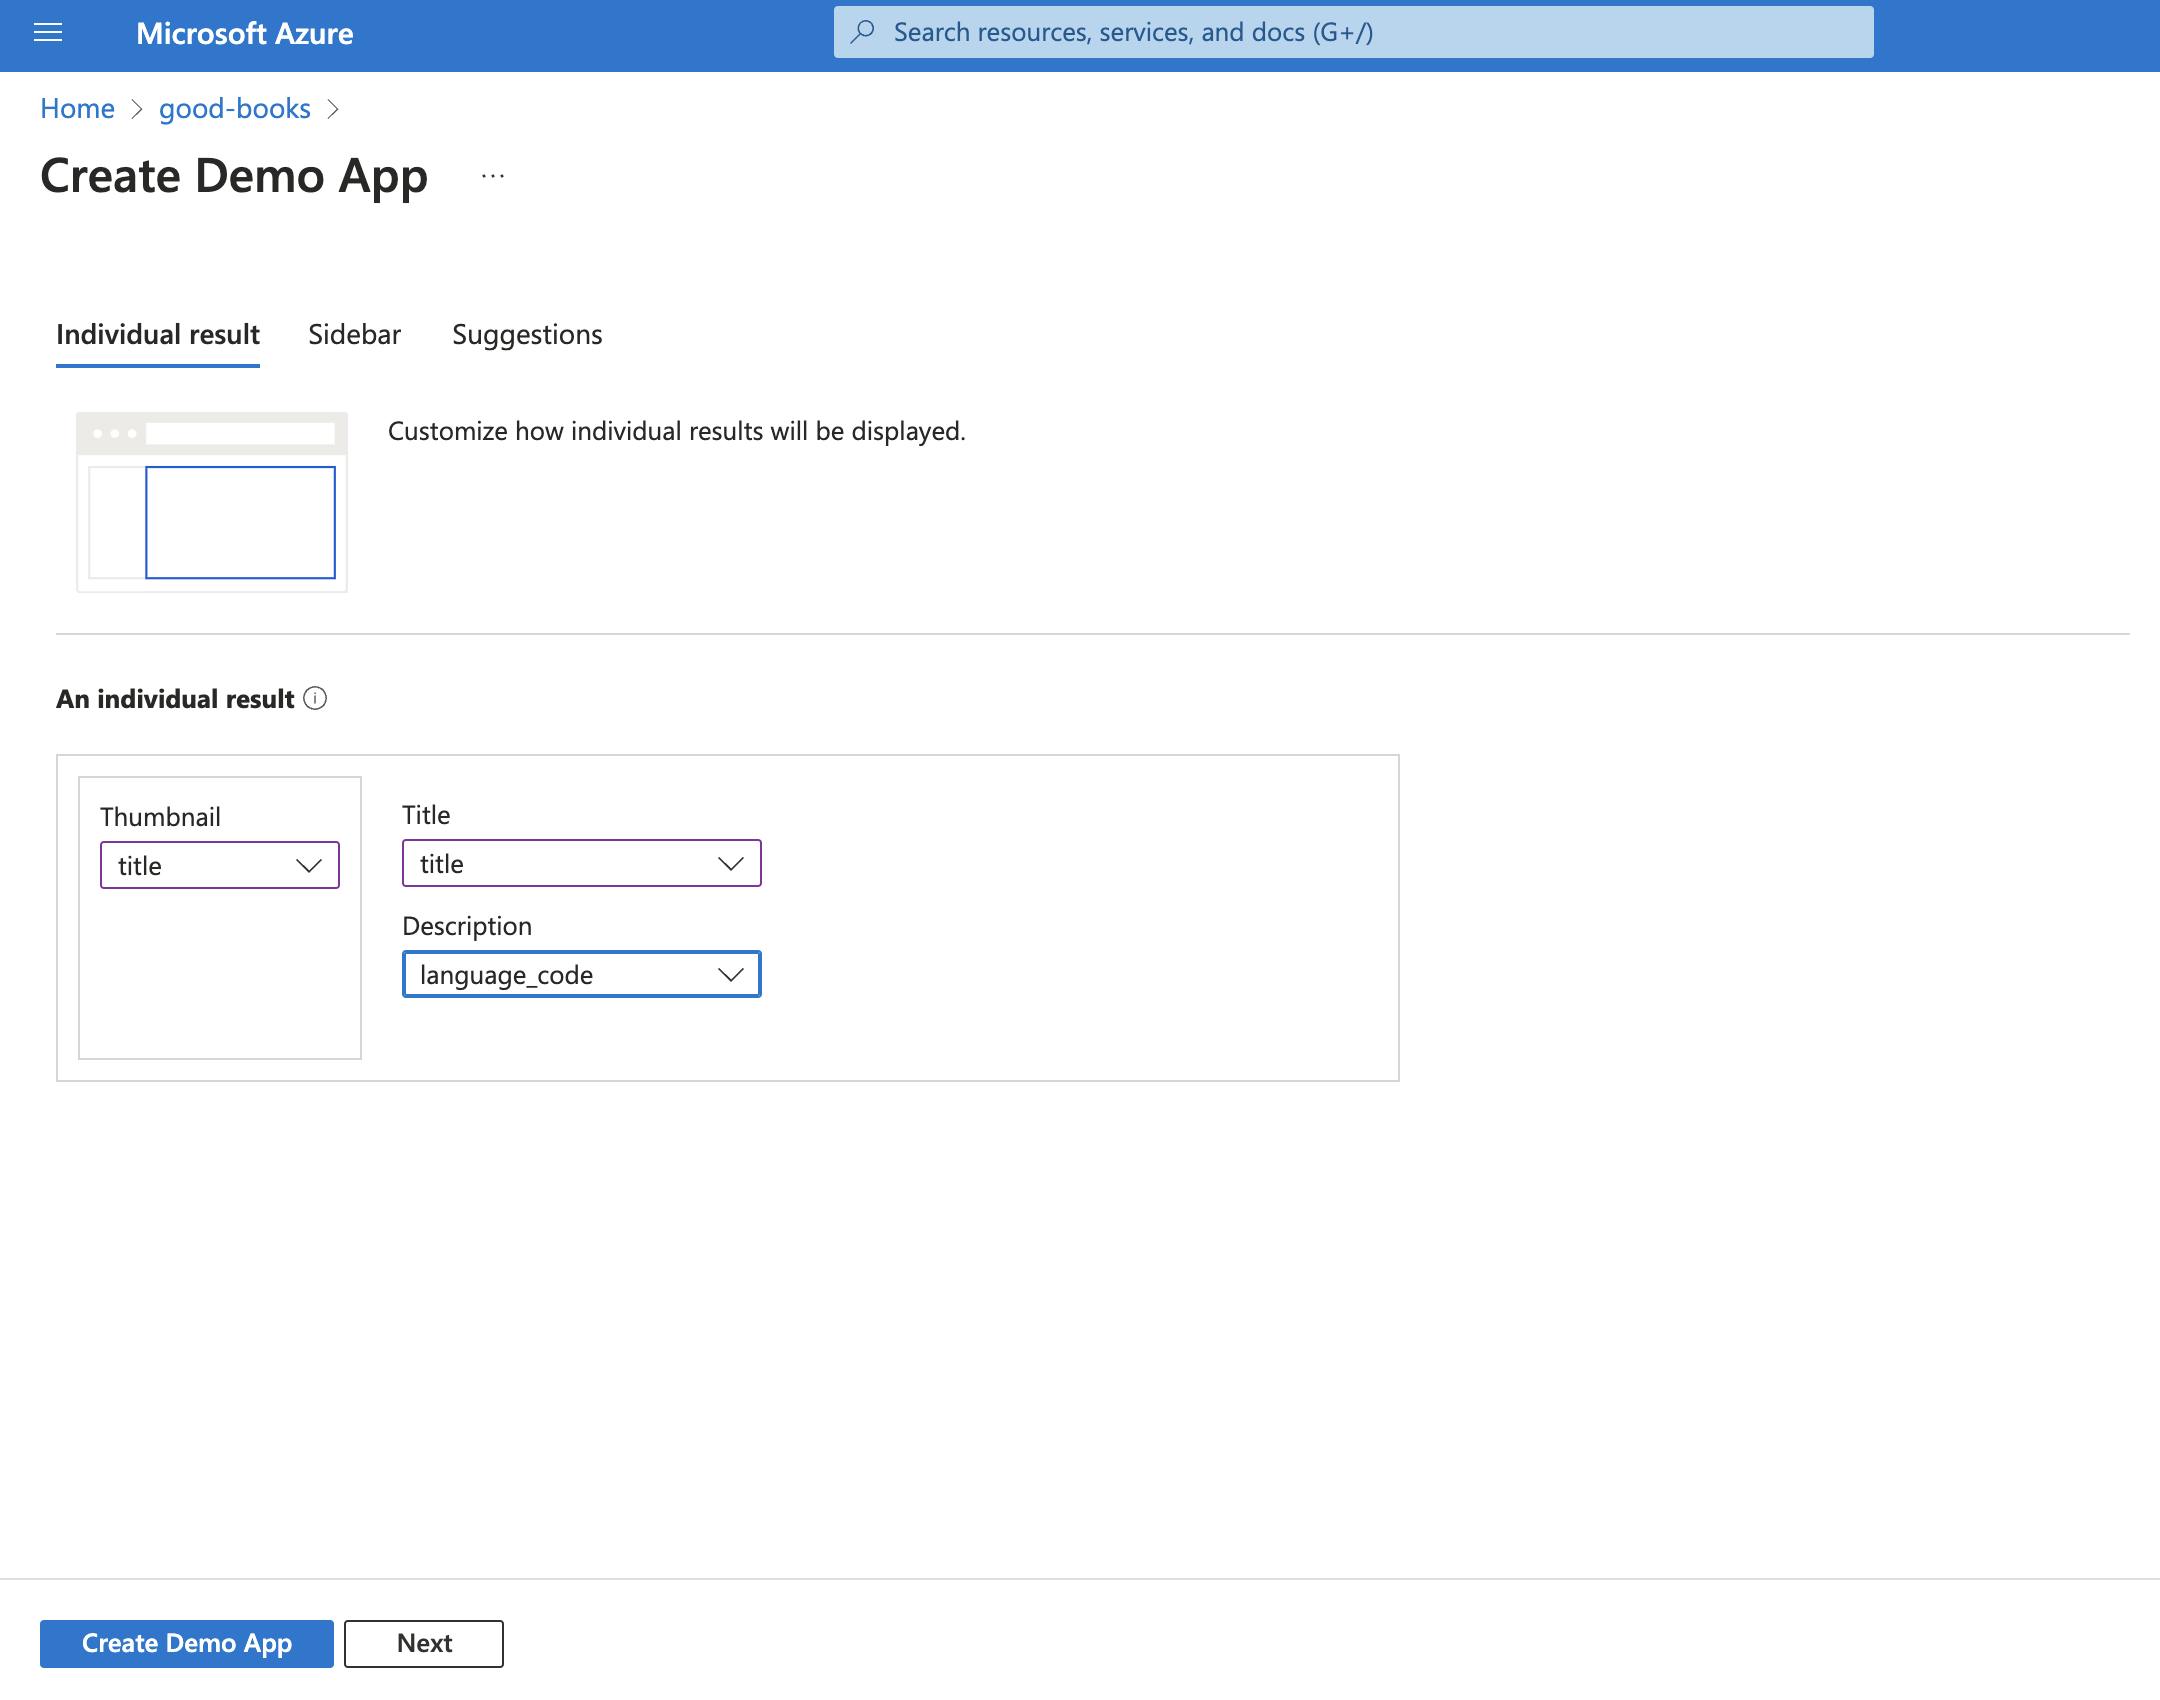 Screenshot of a Microsoft Azure interface for creating a demo app, showing options to customize individual search results with fields for thumbnail, title, and description.